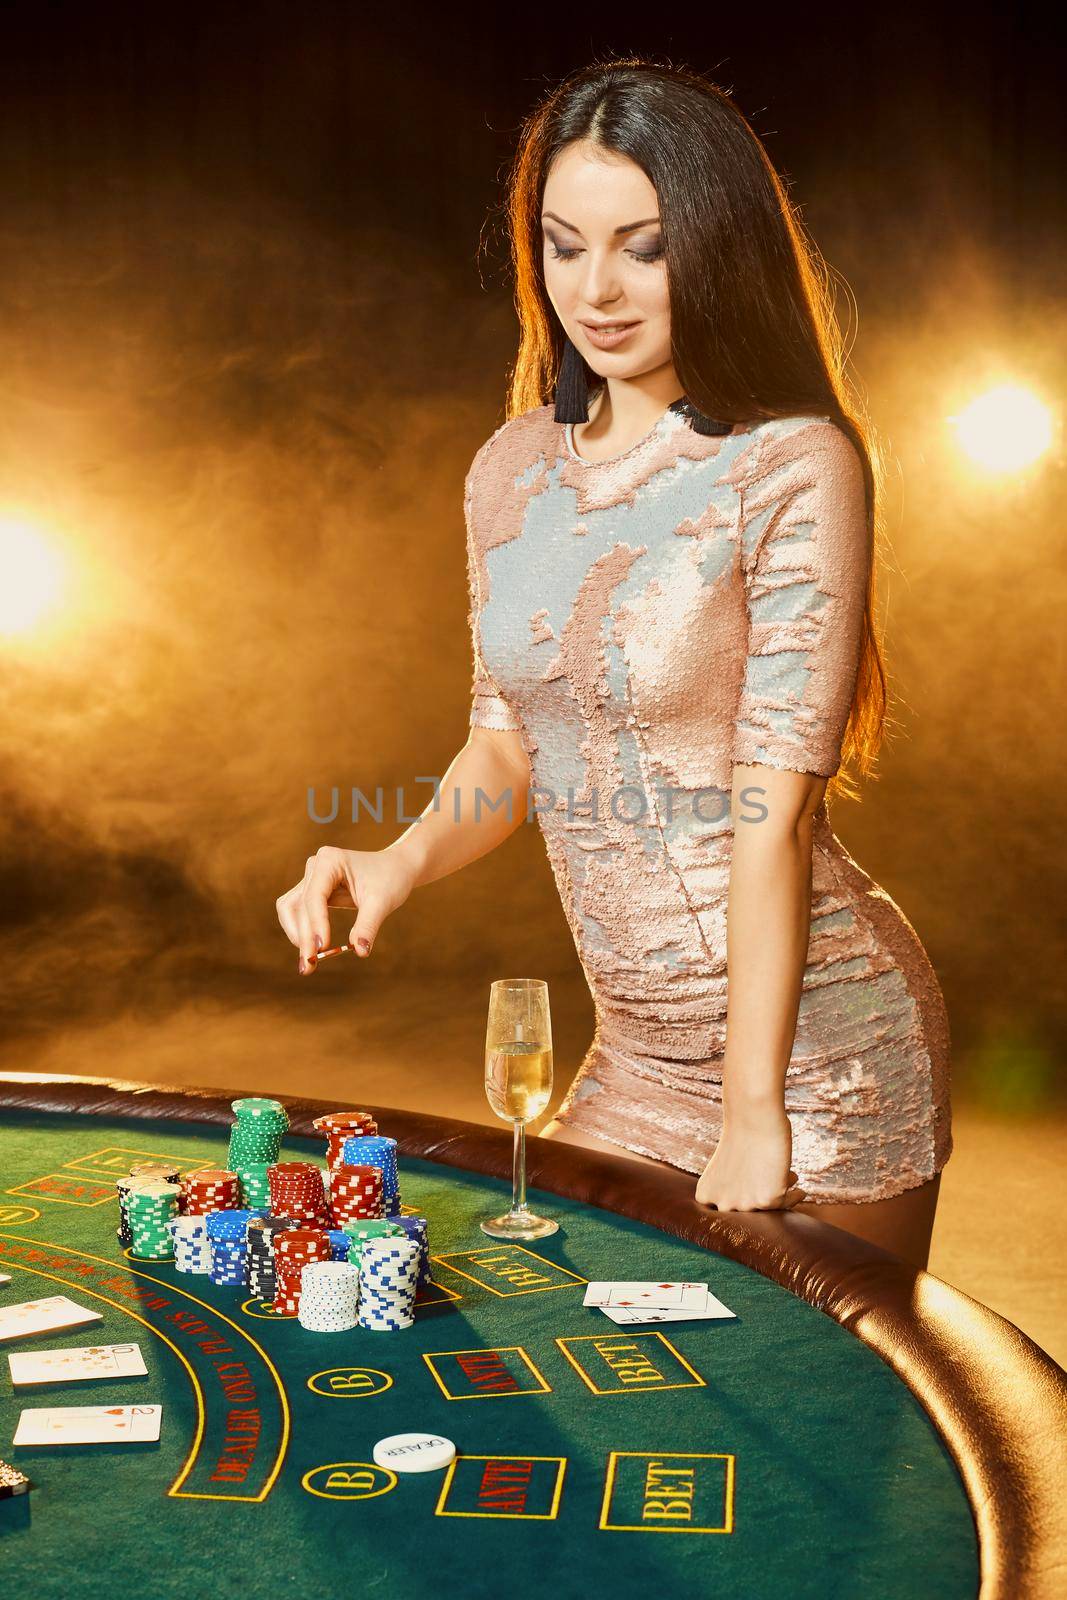 Gorgeous young woman in evening dress with chips in hand standing near poker table with glass of champagne